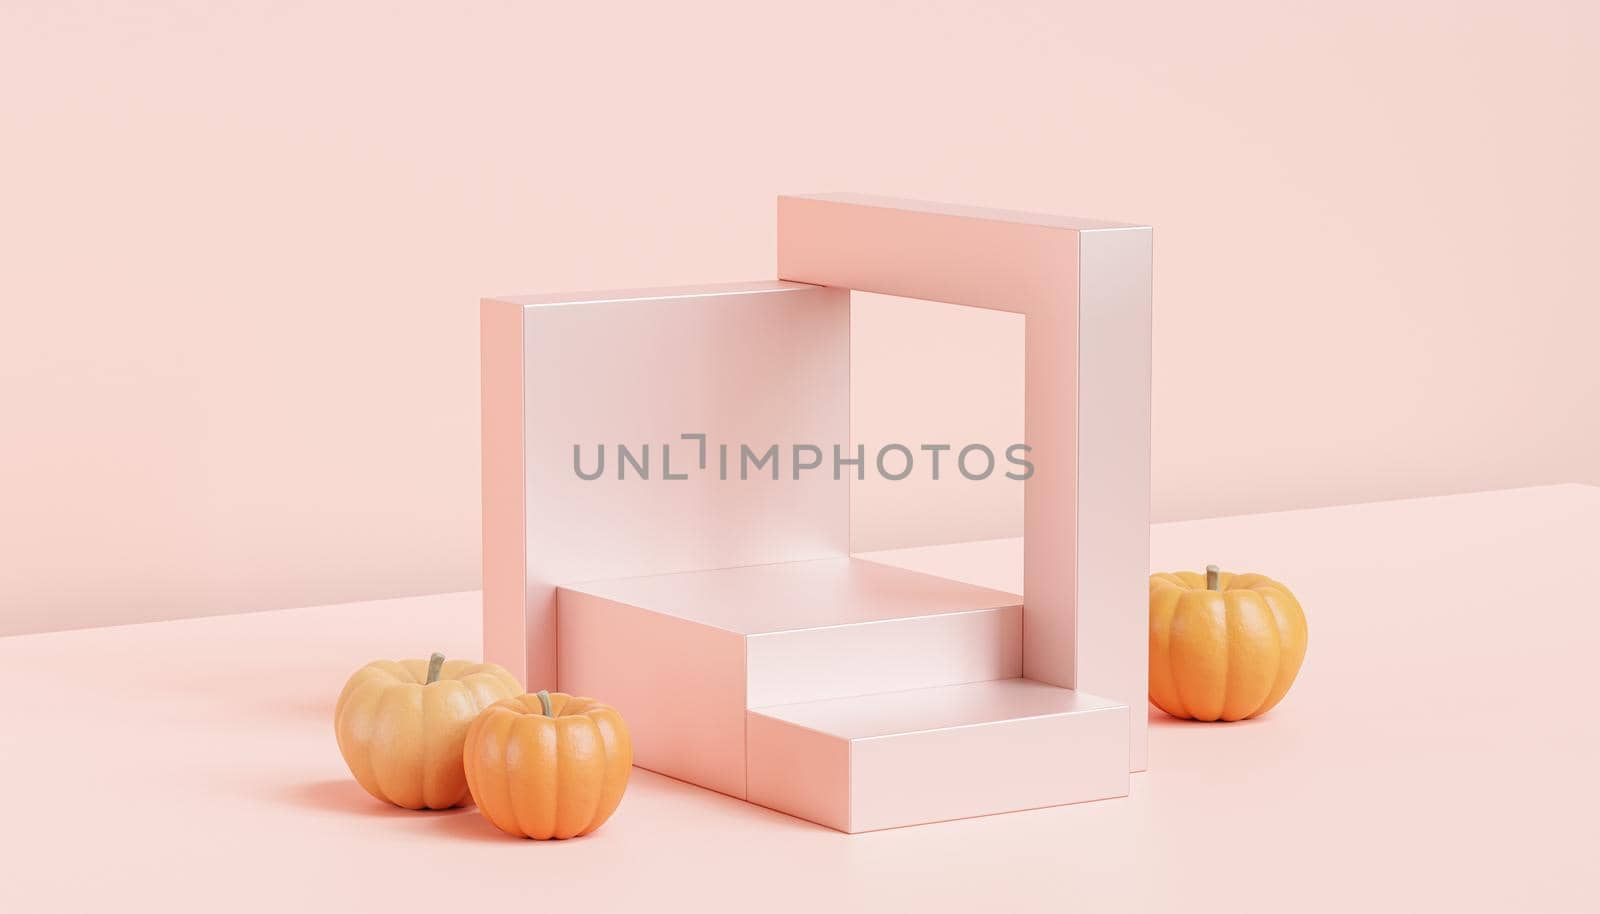 Podium or pedestal with pumpkins for products display or advertising for autumn holidays, 3d render by Frostroomhead